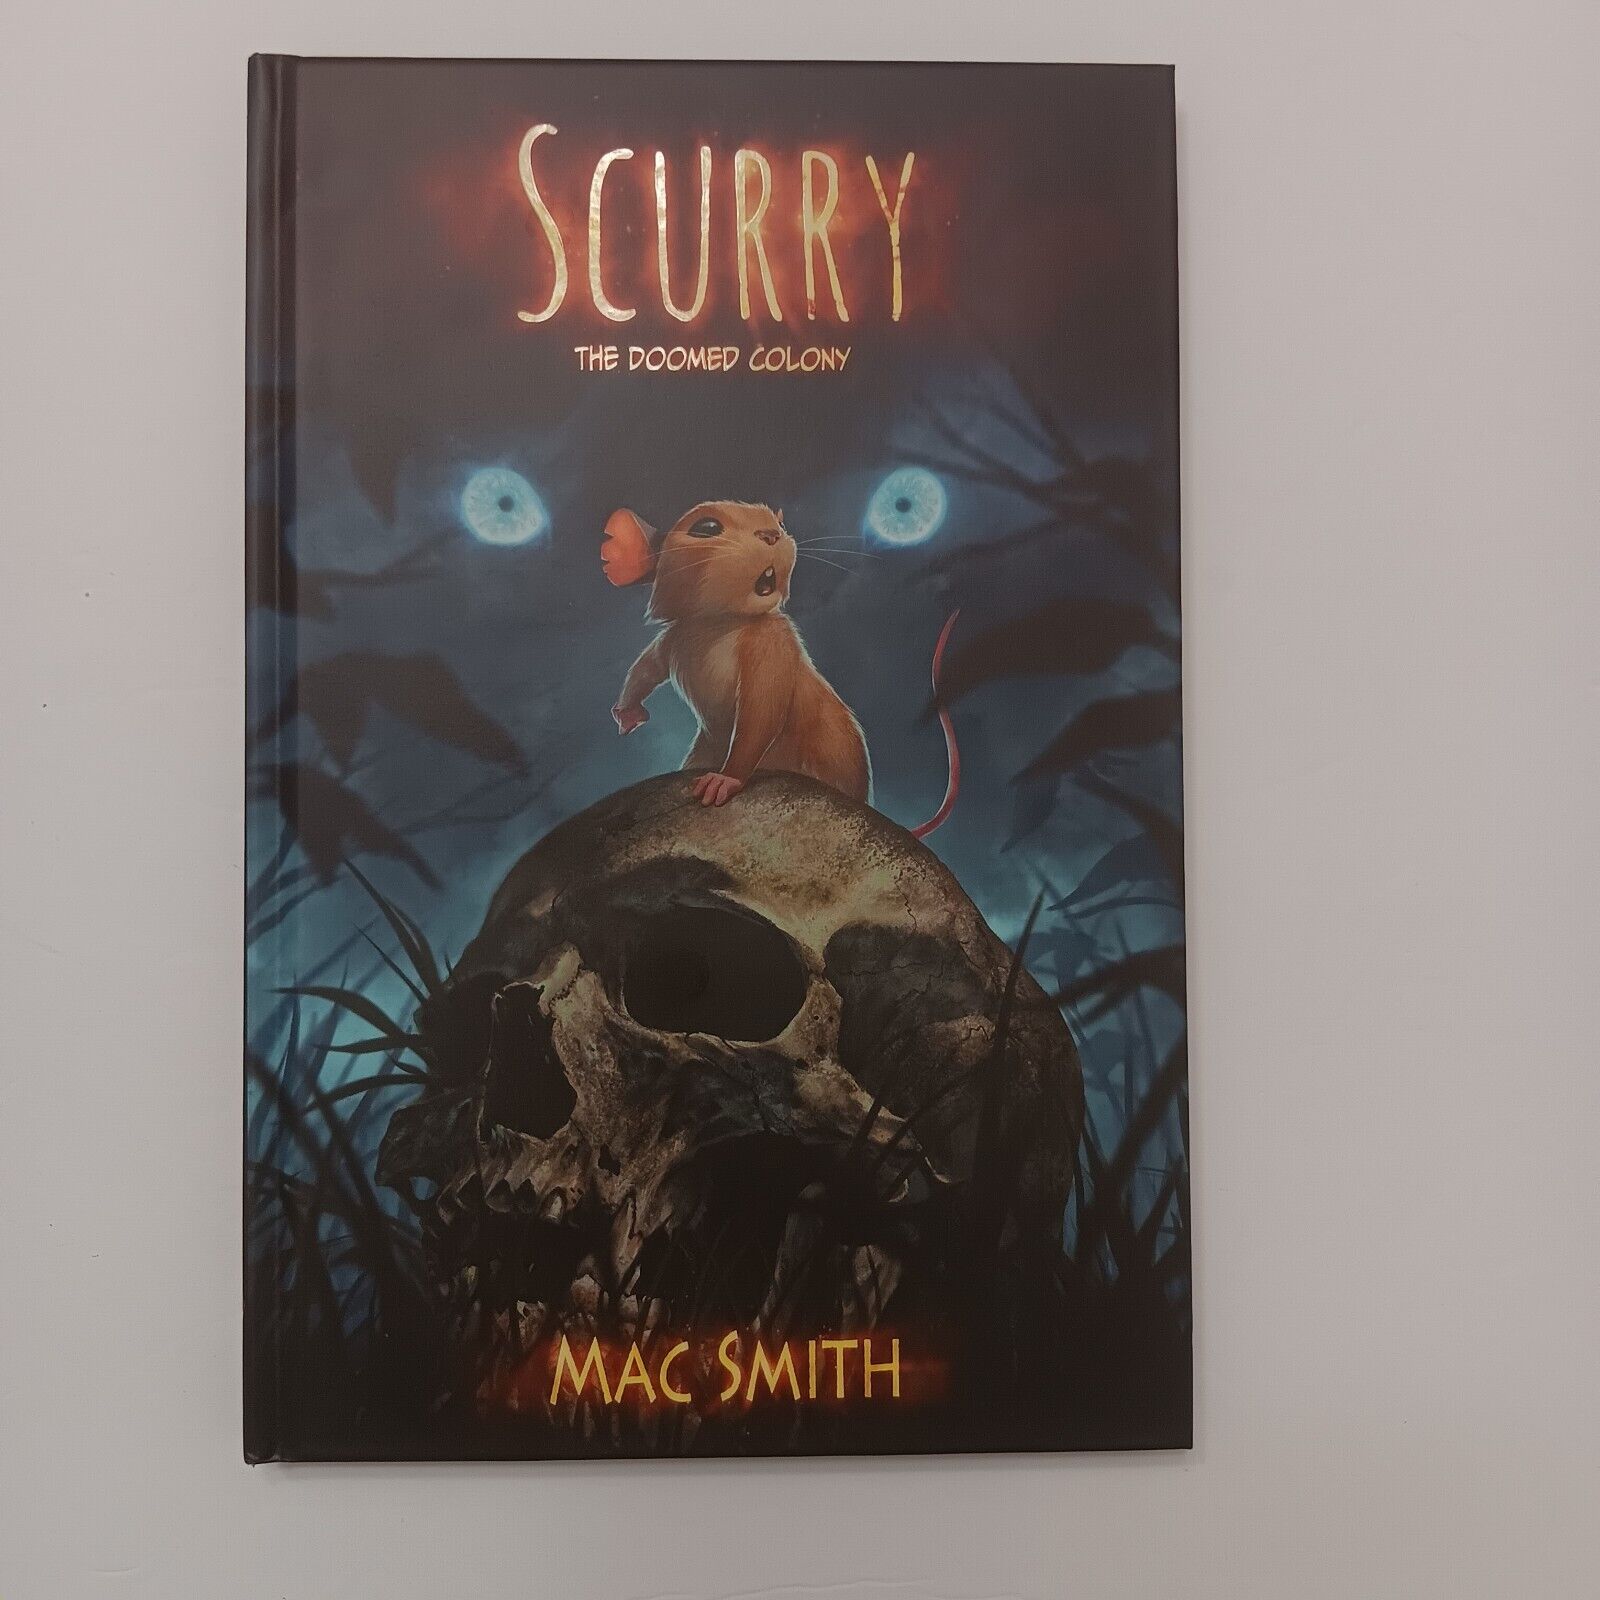 Scurry The Doomed Colony Volume 1 First Edition #681 Of 2300 Mac Smith HC 2016